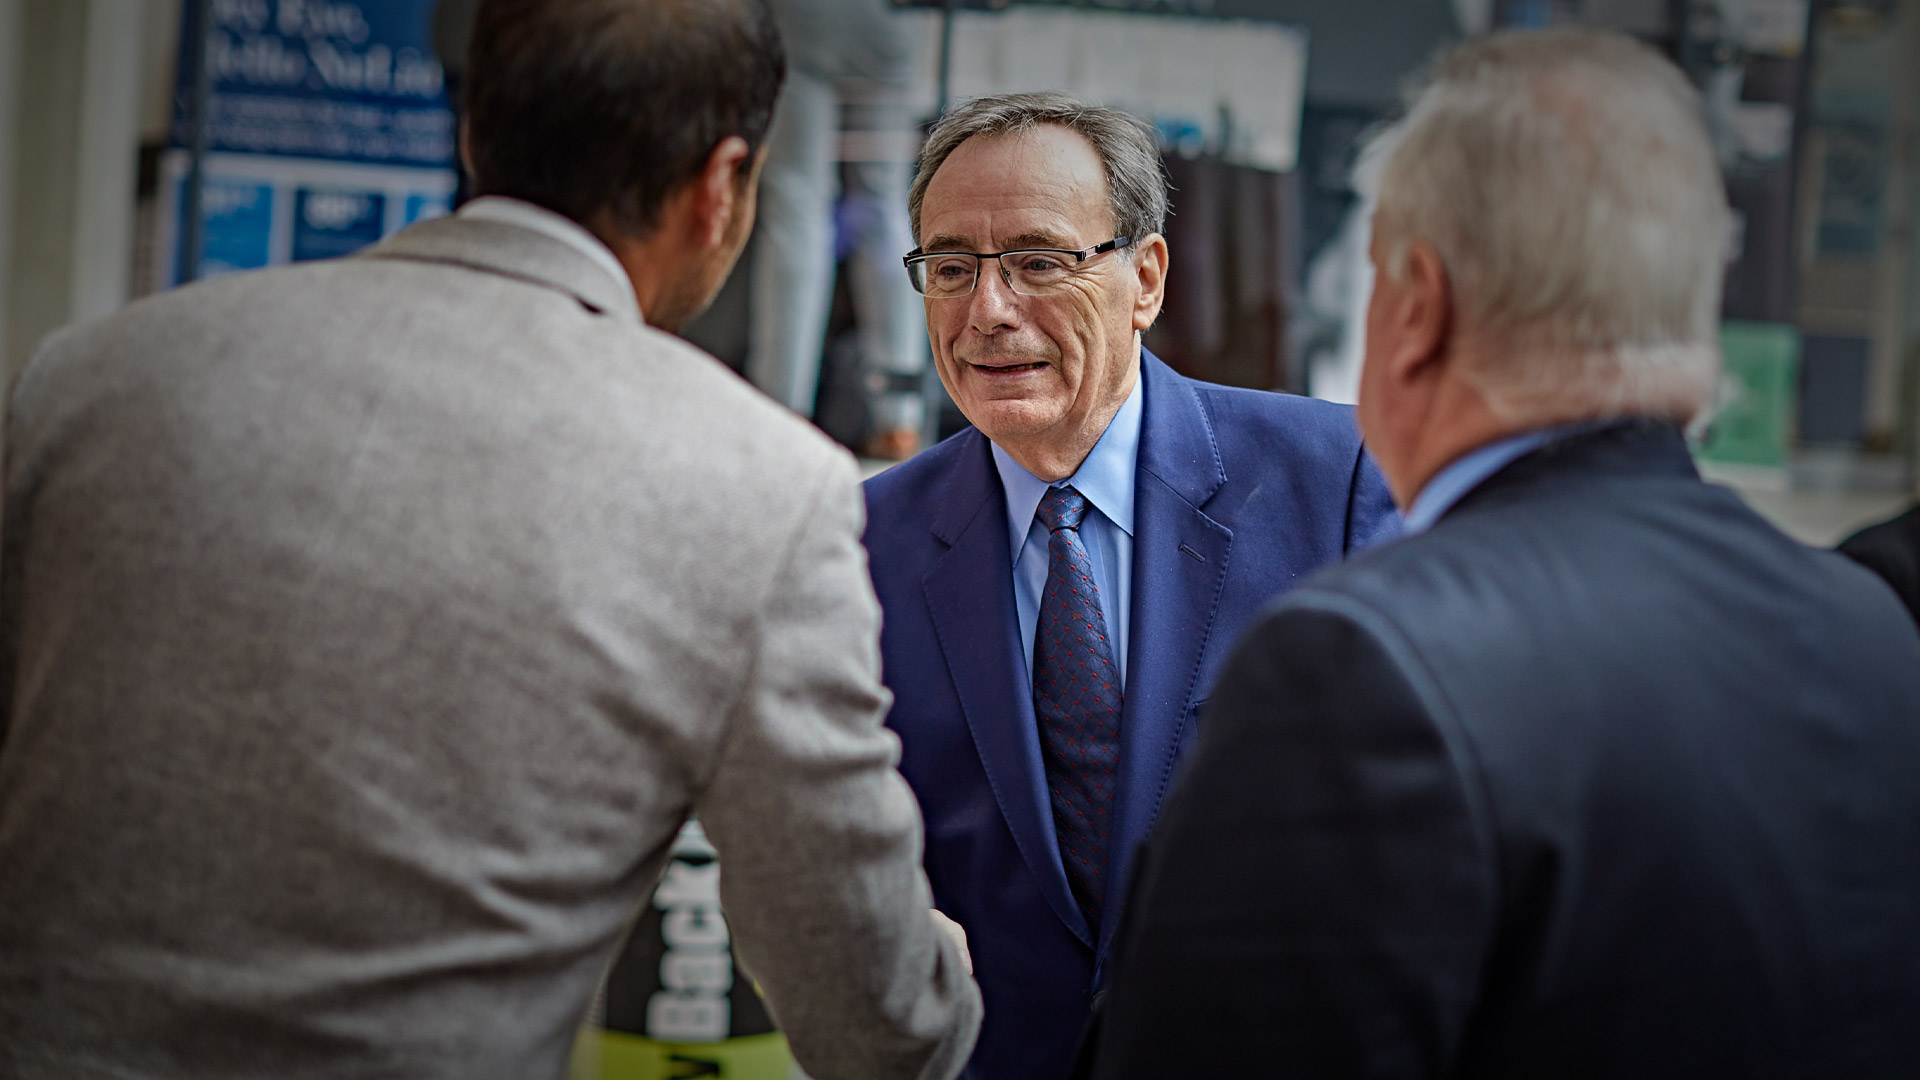 Chancellor Sir George Buckley meets Moin Valli, Managing Director of Valli Opticians